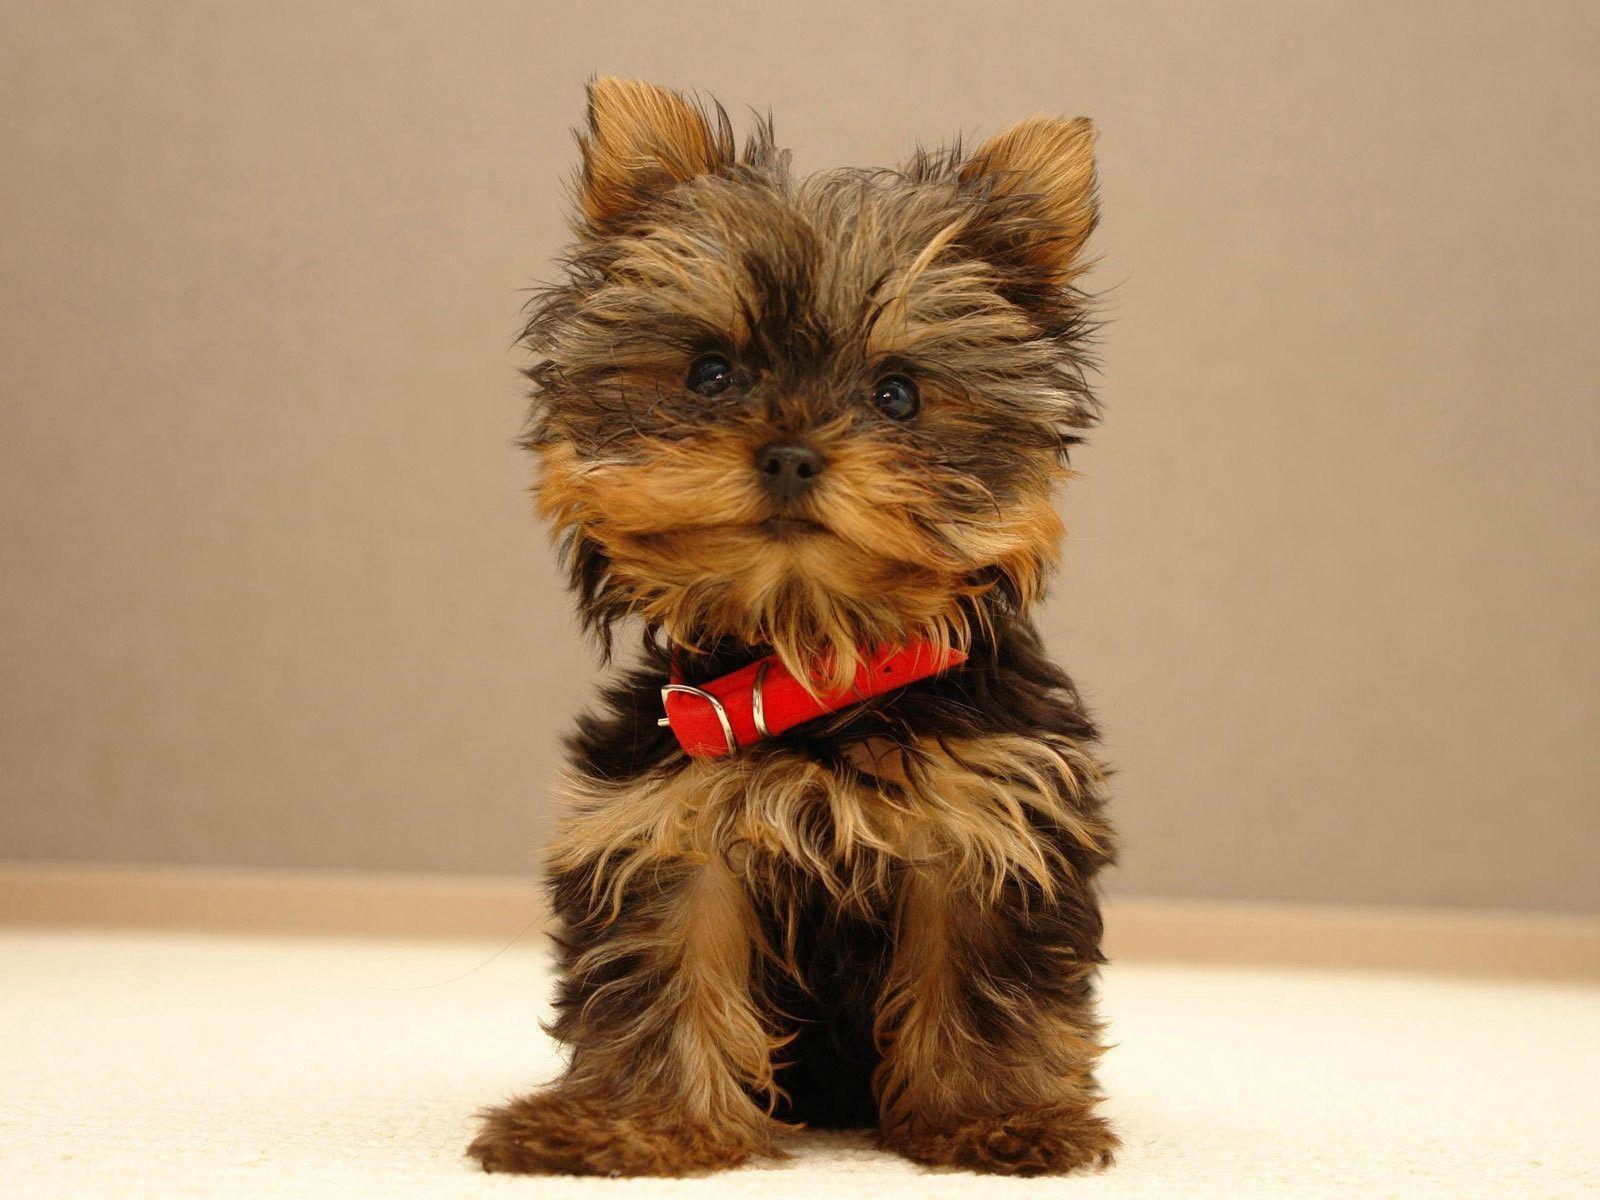 Yorkshire Terrier Dog Wallpaper and Photo Download by PHOTOSof.ORG